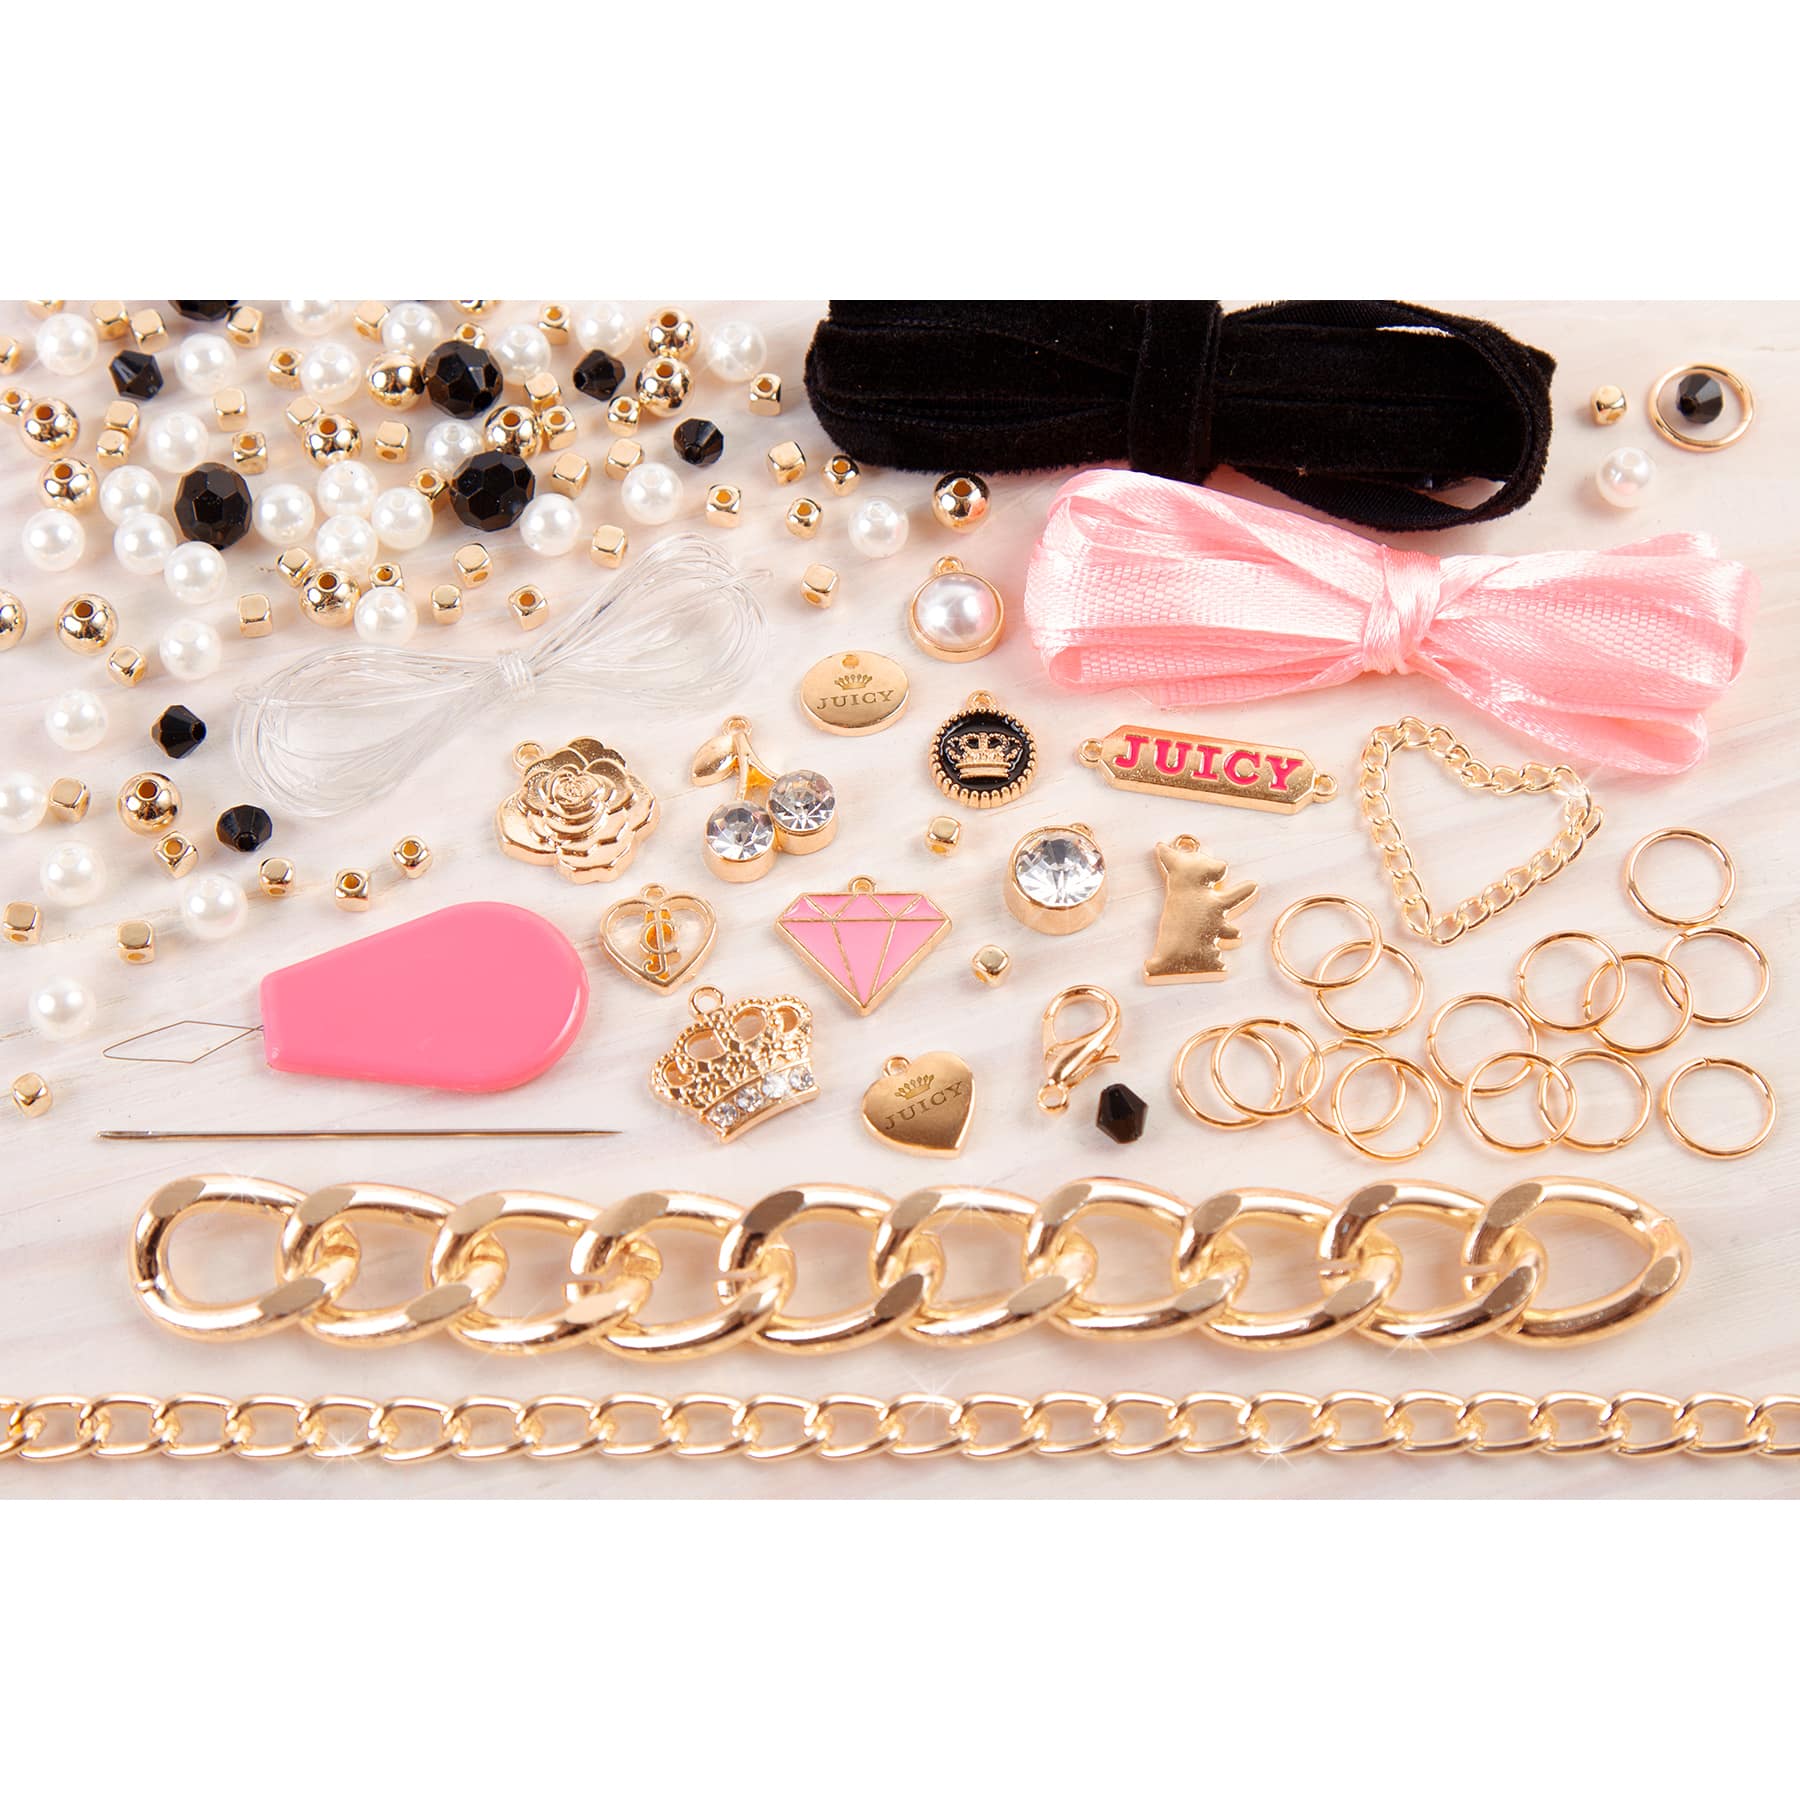 Make It Real - Juicy Couture Mini Chains and Charms - DIY Charm Bracelet  Making Kit - Friendship Bracelet Kit with Charms, Beads & Cords - Arts &  Crafts Bead Kit for